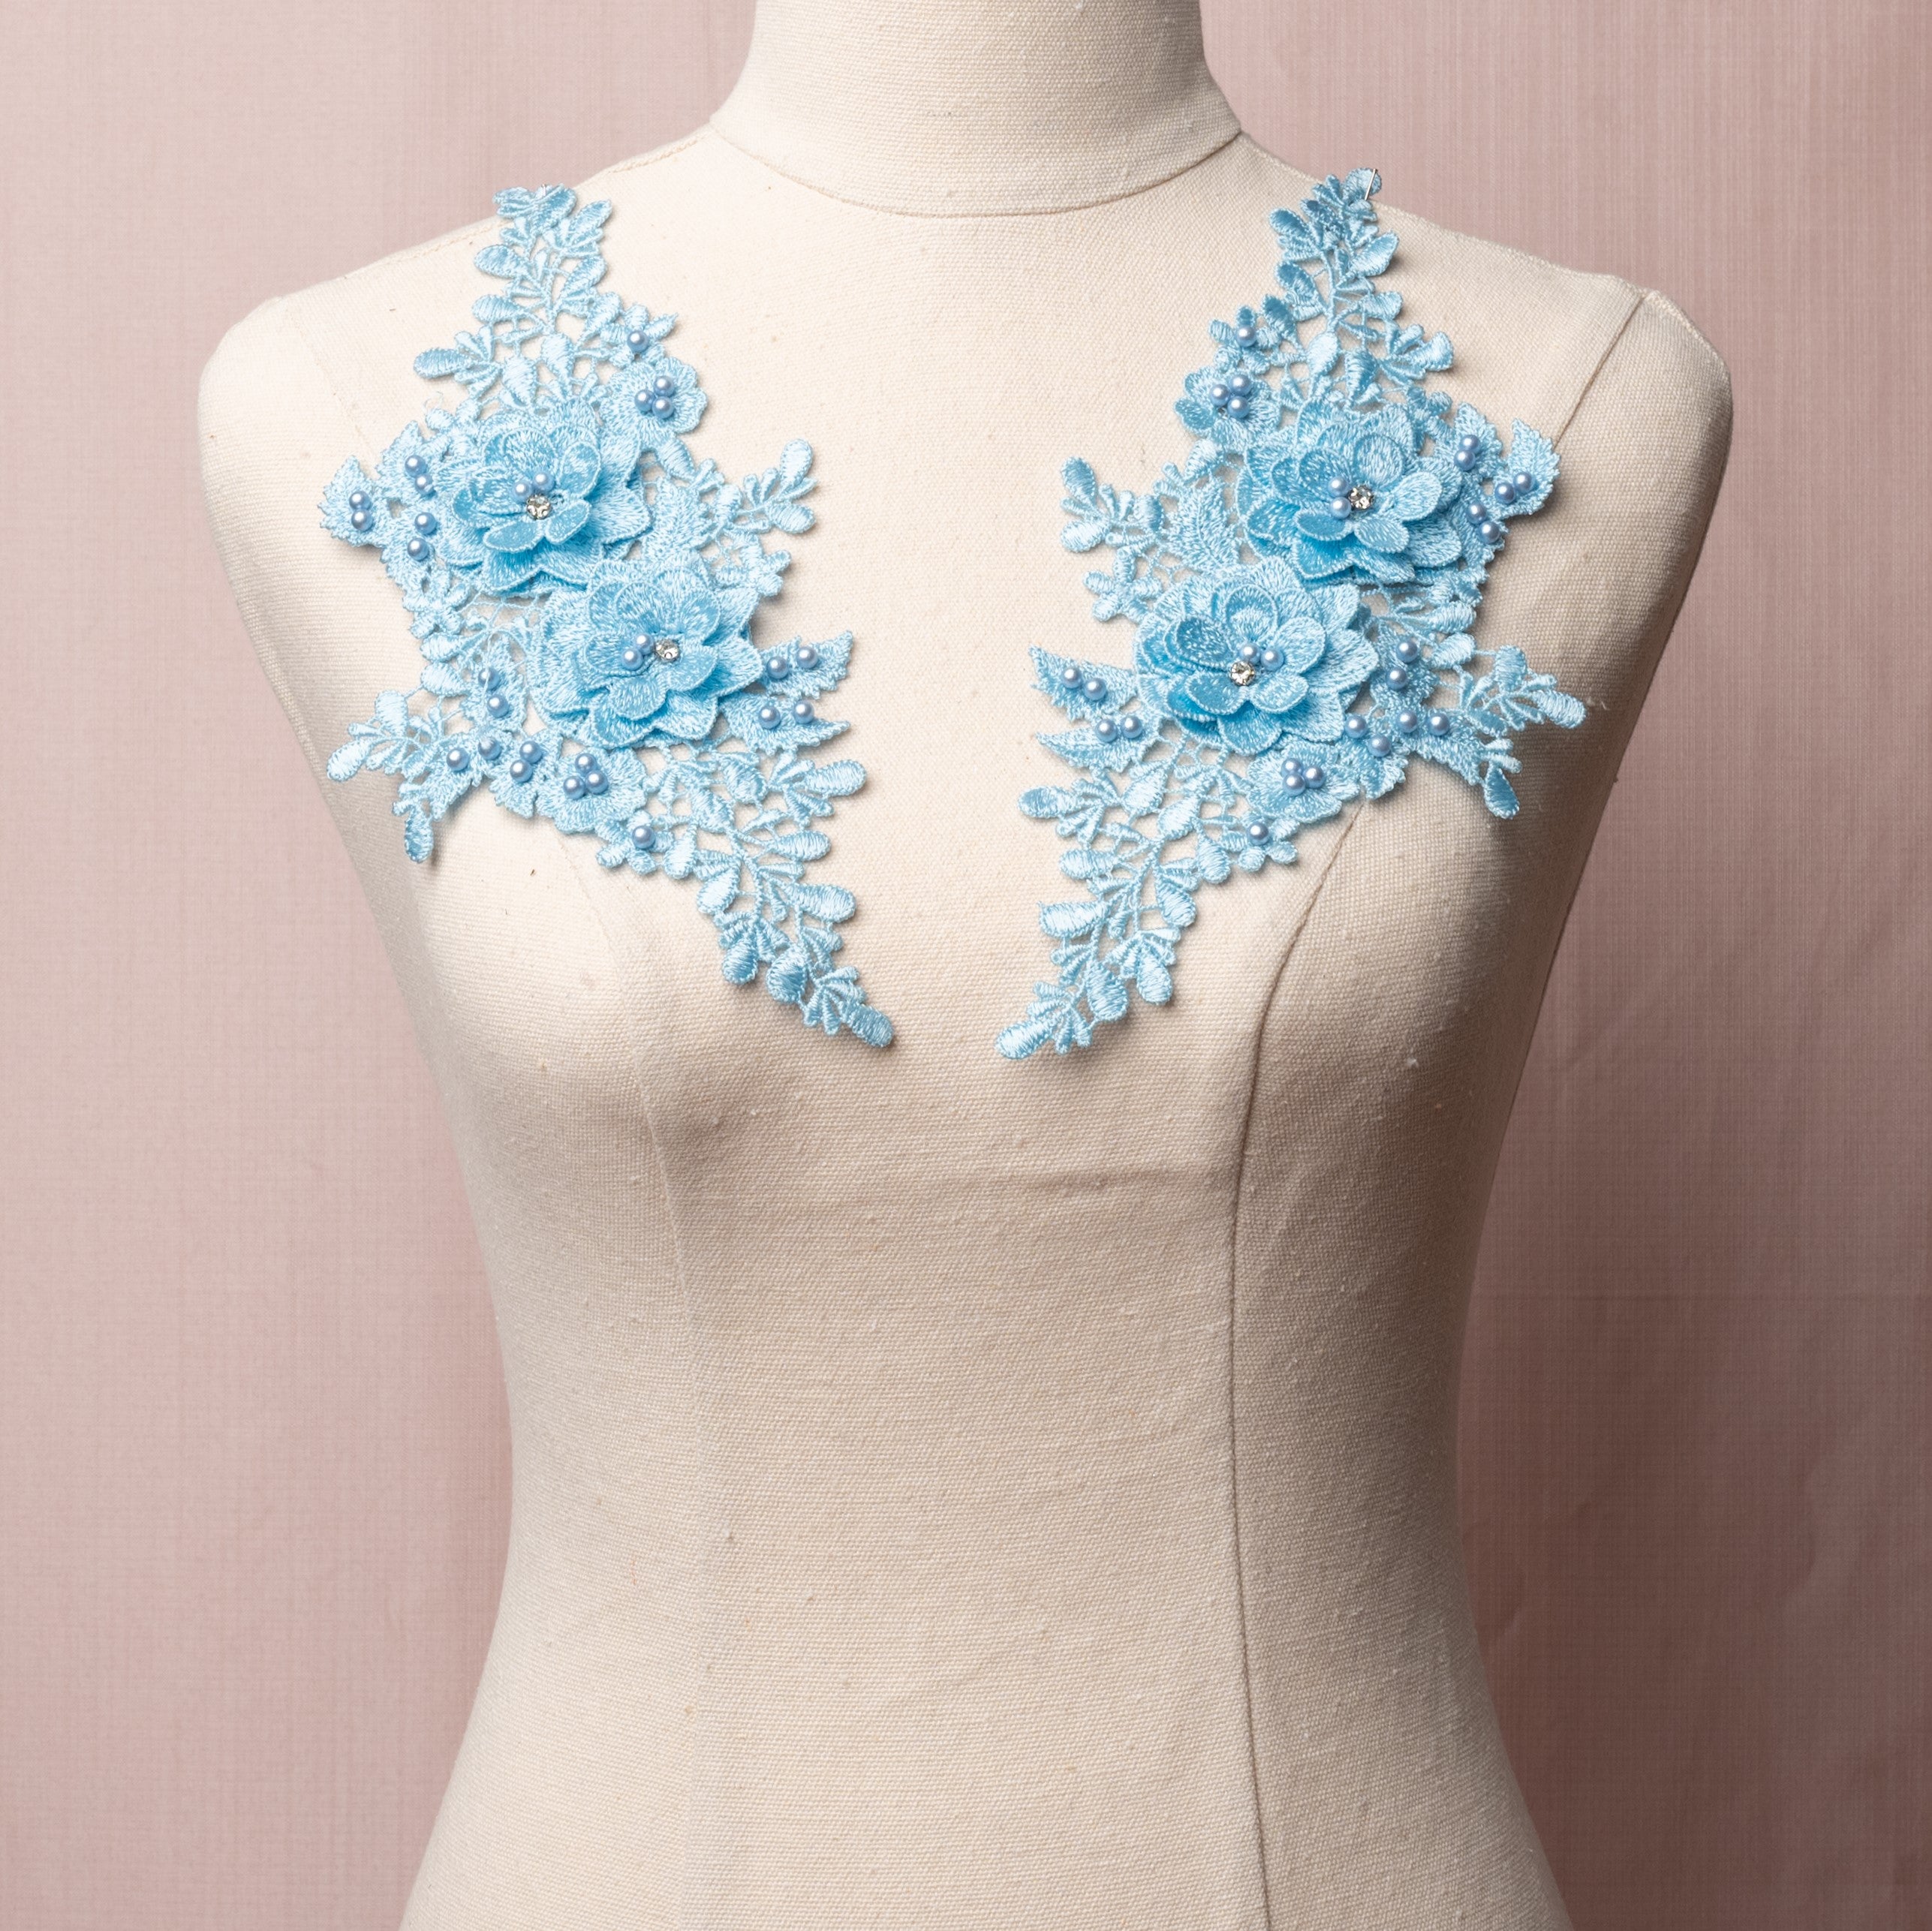 Pale blue embroidered applique pair with 3D flowers.  The applique is embellished with a scattering of blue pearls and the 3D flowers have a crystal centre and are displayed on a mannequin.